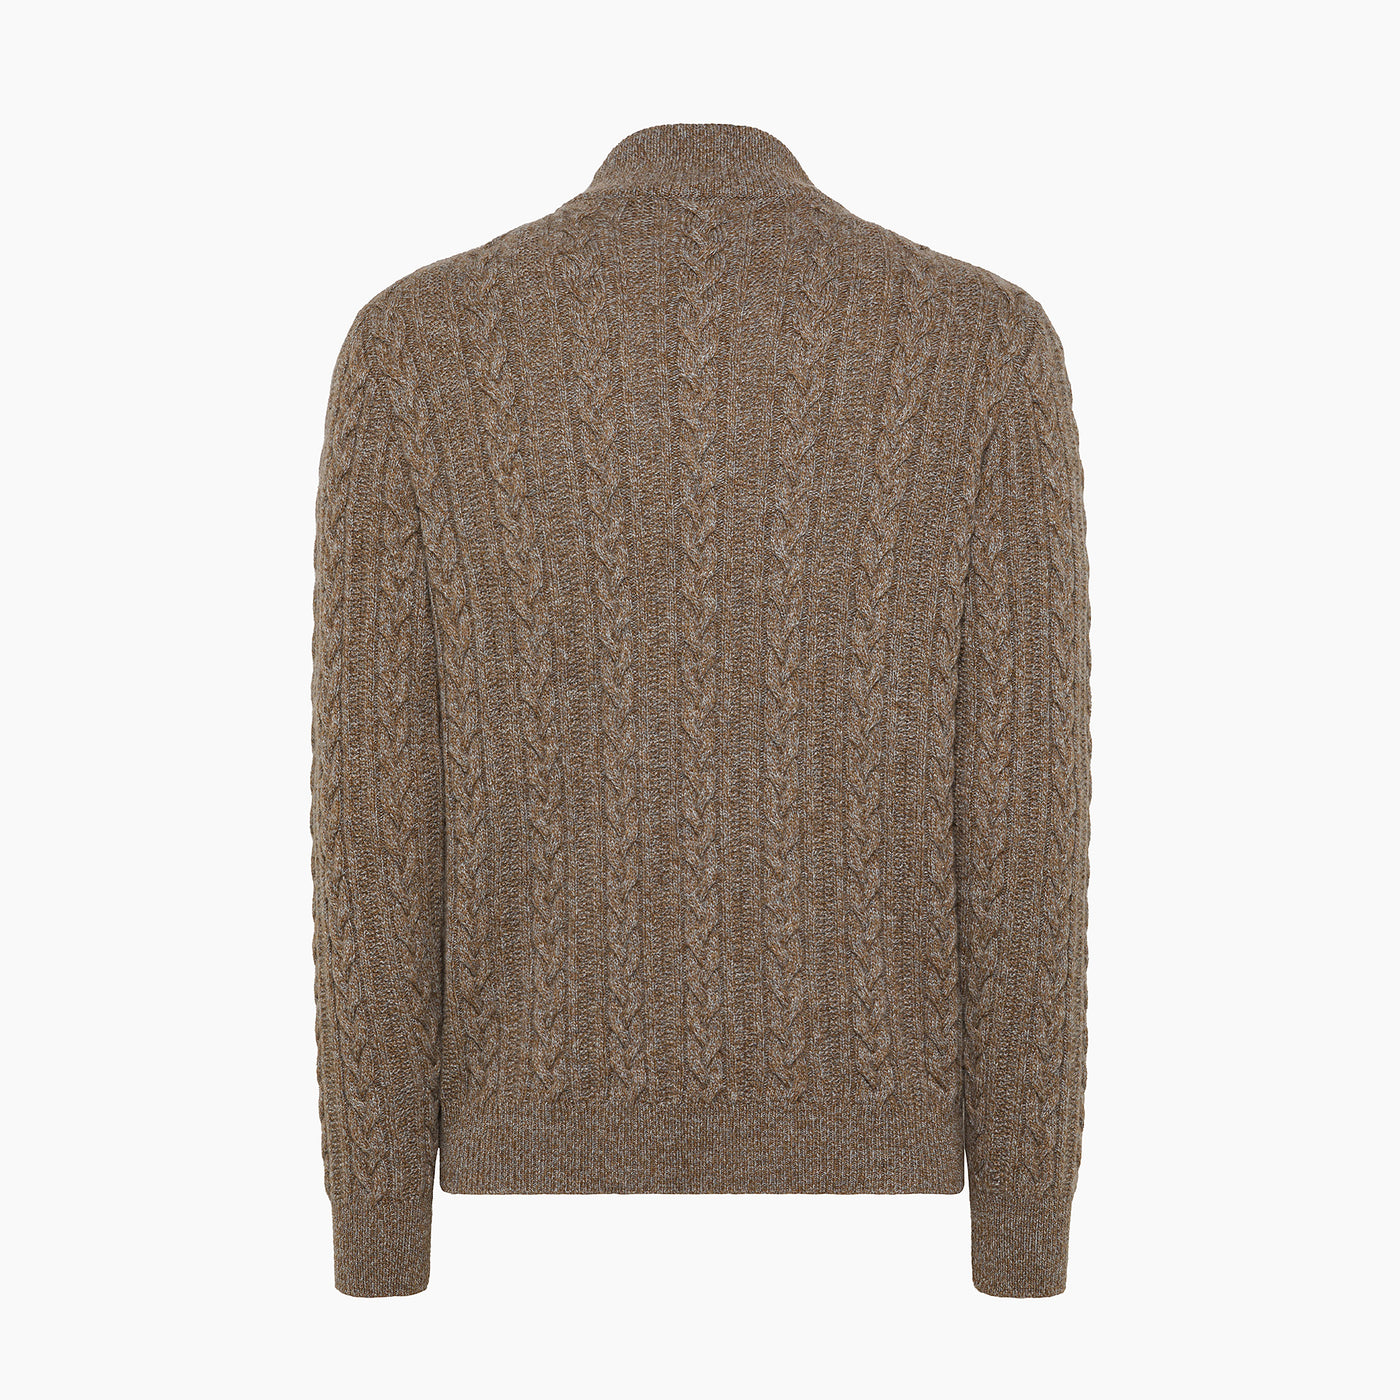 Sauvian knitted Crew Neck in Mouliné Cashmere